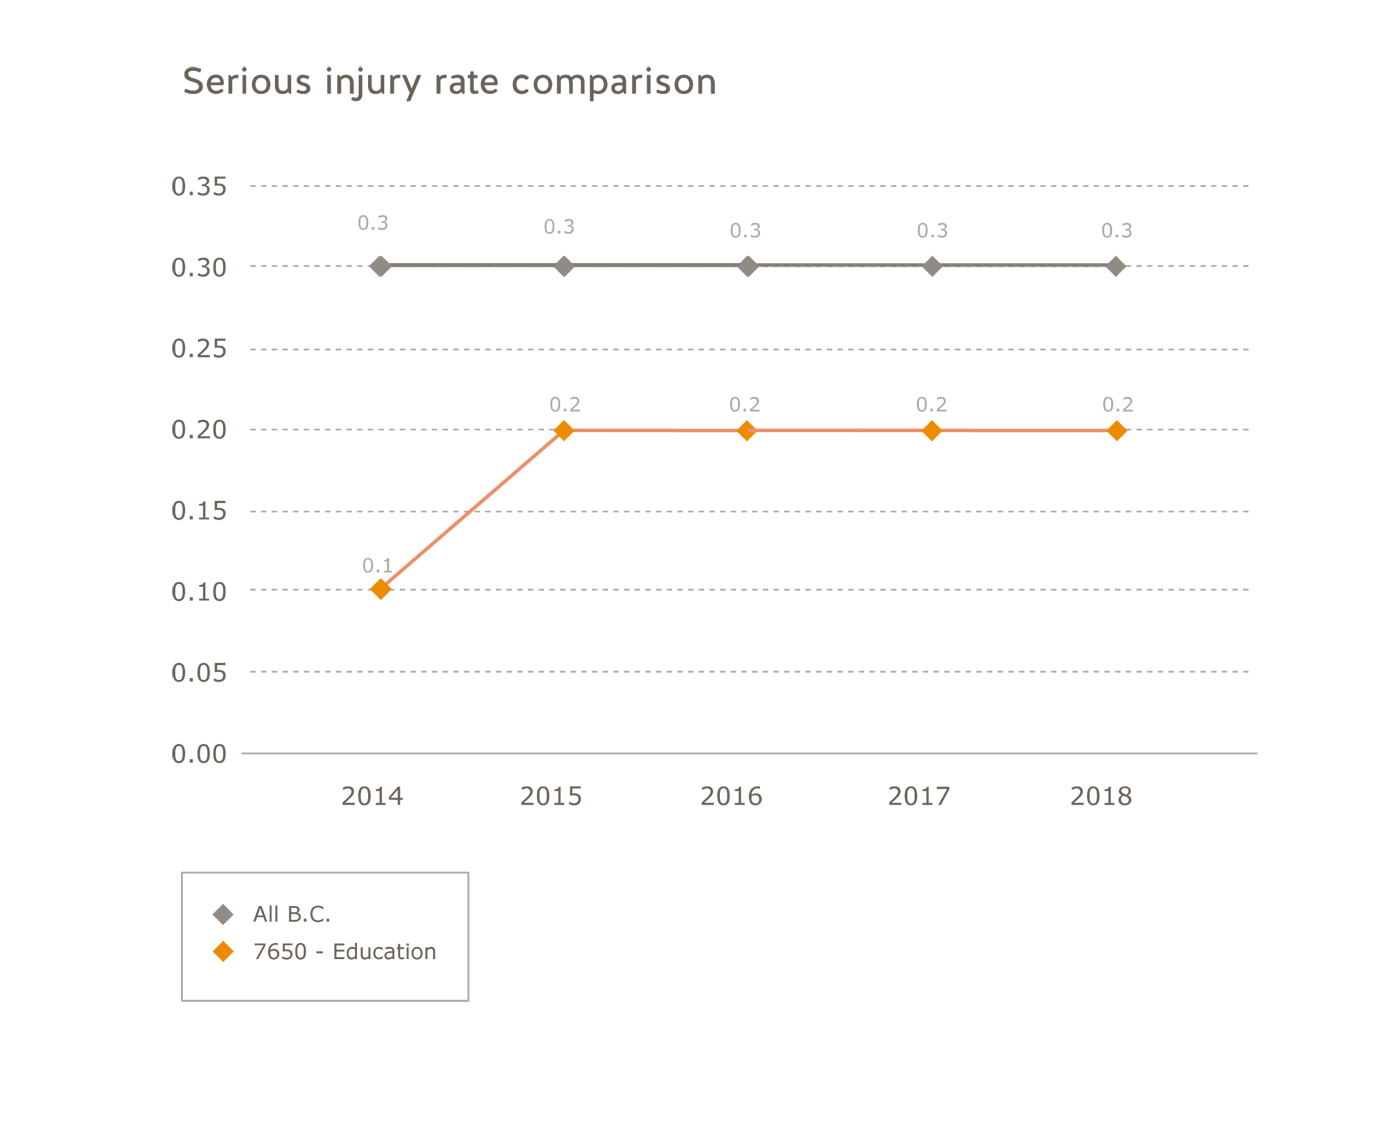 Education sector serious injury rate comparison. All B.C.: 2014=0.3; 2015=0.3; 2016=0.3; 2017=0.3; 2018=0.3. Education: 2014=0.1; 2015=0.2; 2016=0.2; 2017=0.2; 2018=0.2.